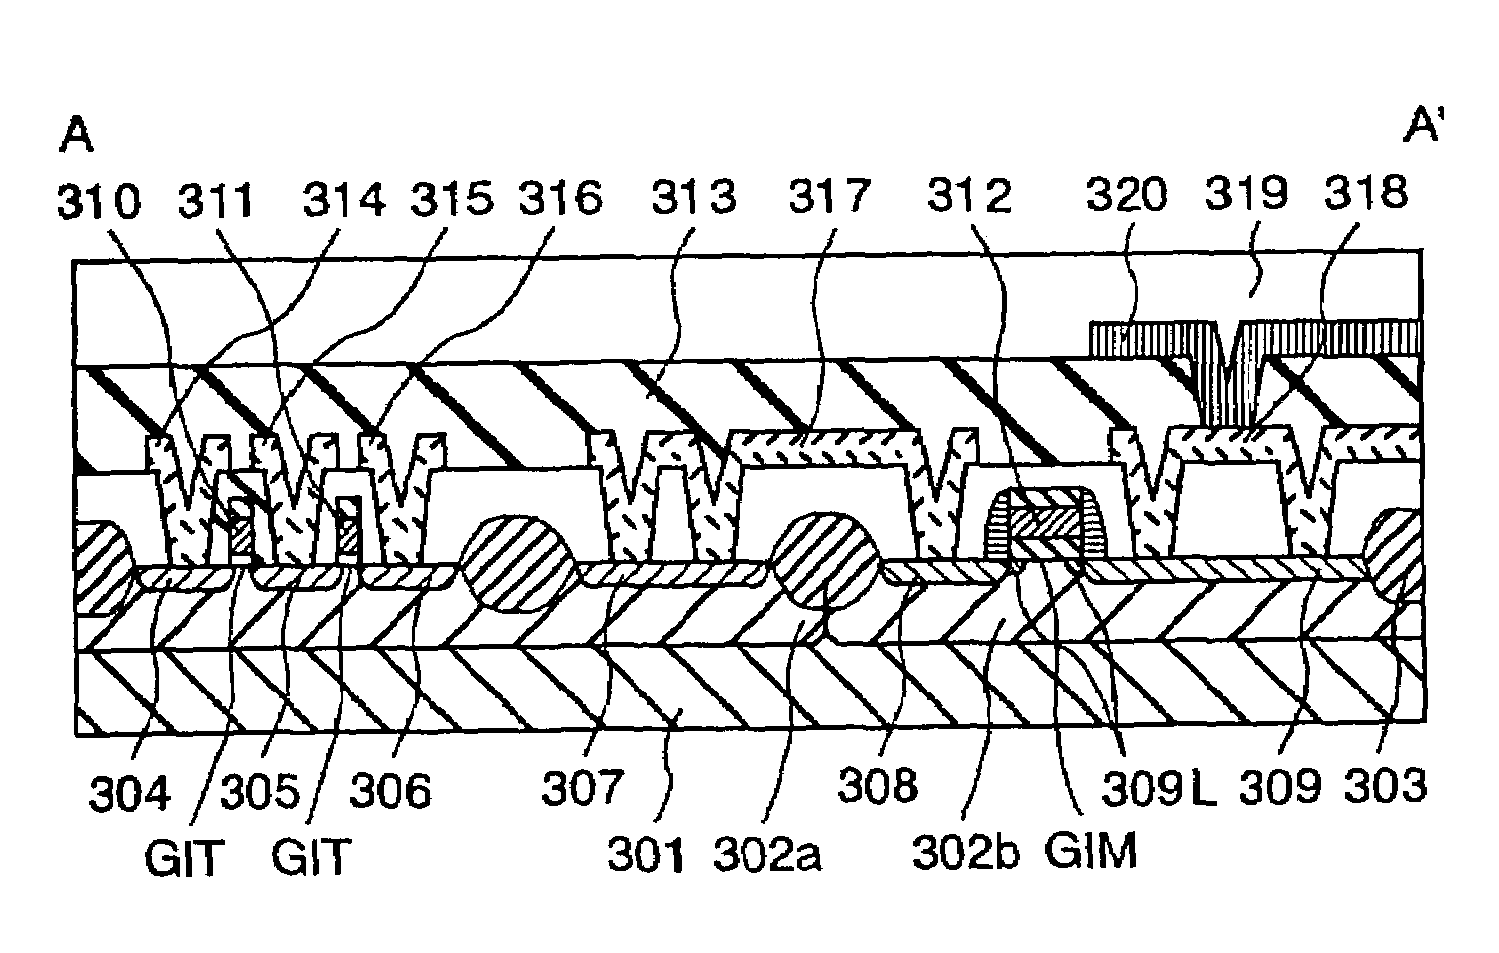 Method of forming a CMOS structure having gate insulation films of different thicknesses